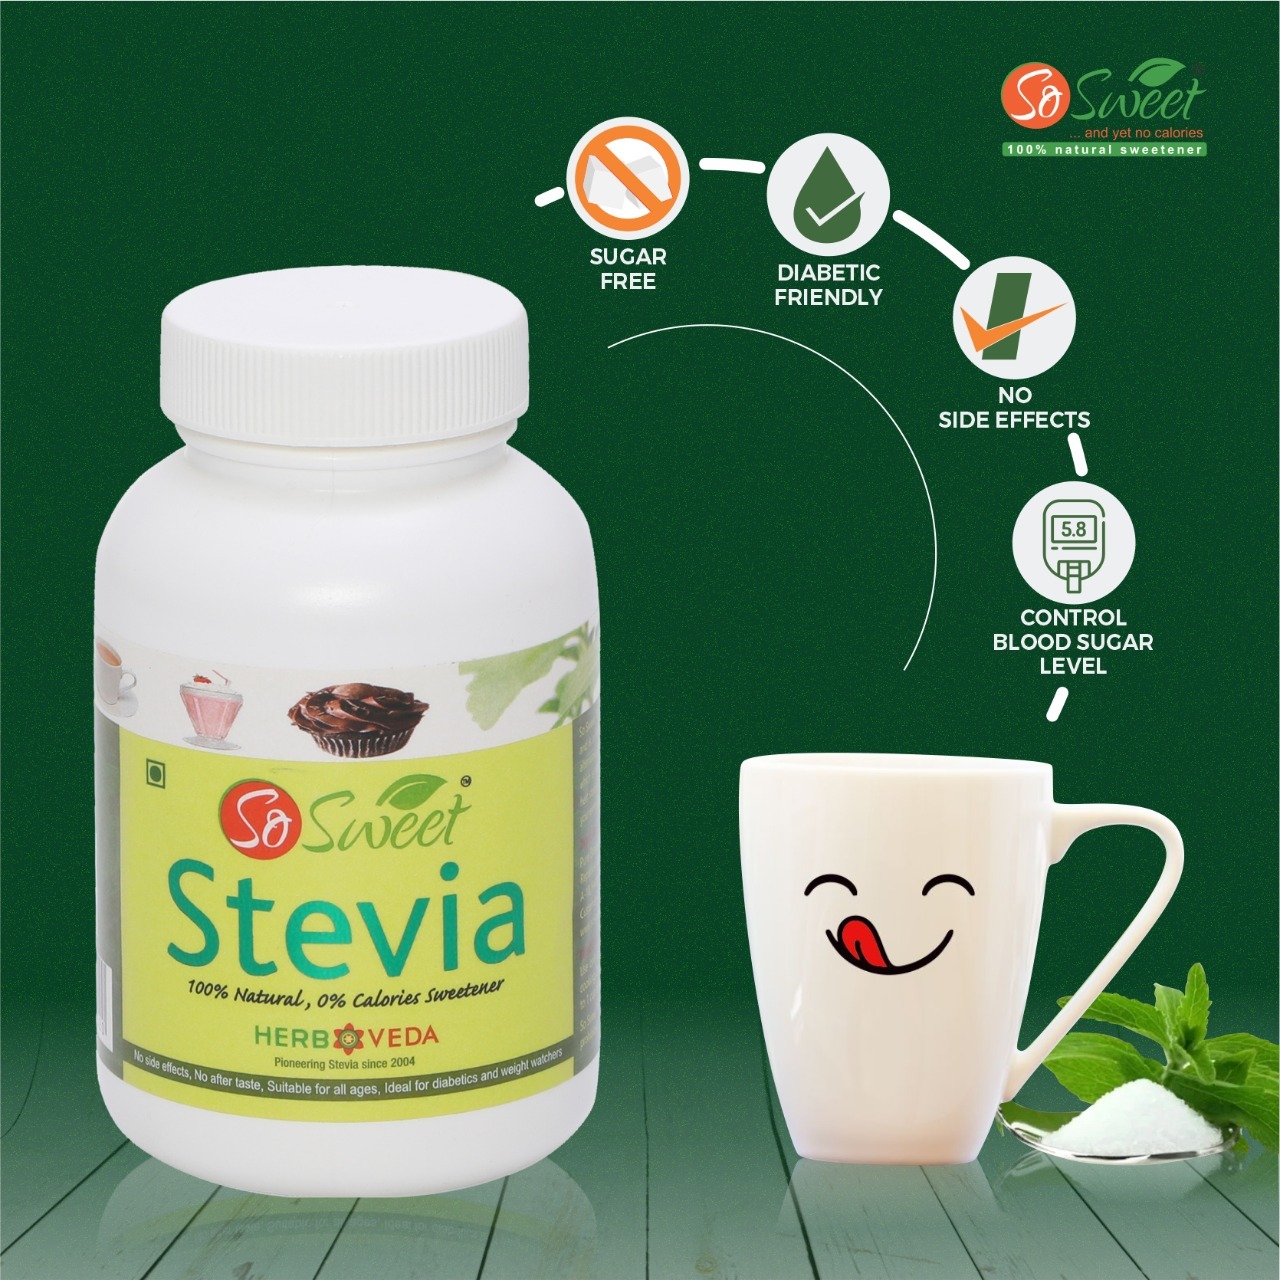 So Sweet Stevia Extract 25 gm bottle